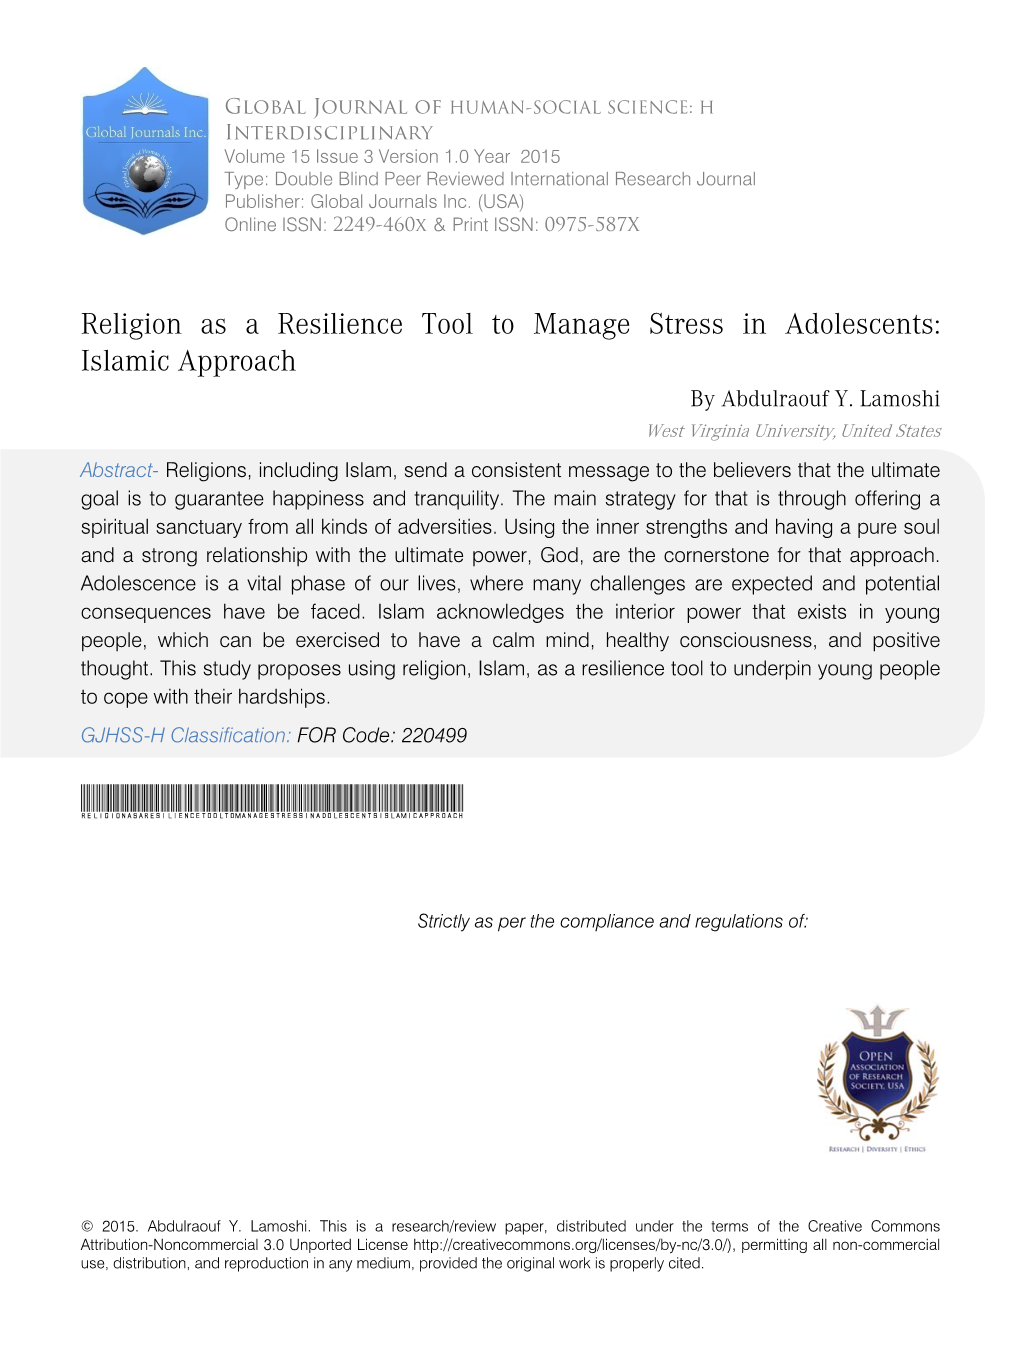 Religion As a Resilience Tool to Manage Stress in Adolescents: Islamic Approach by Abdulraouf Y